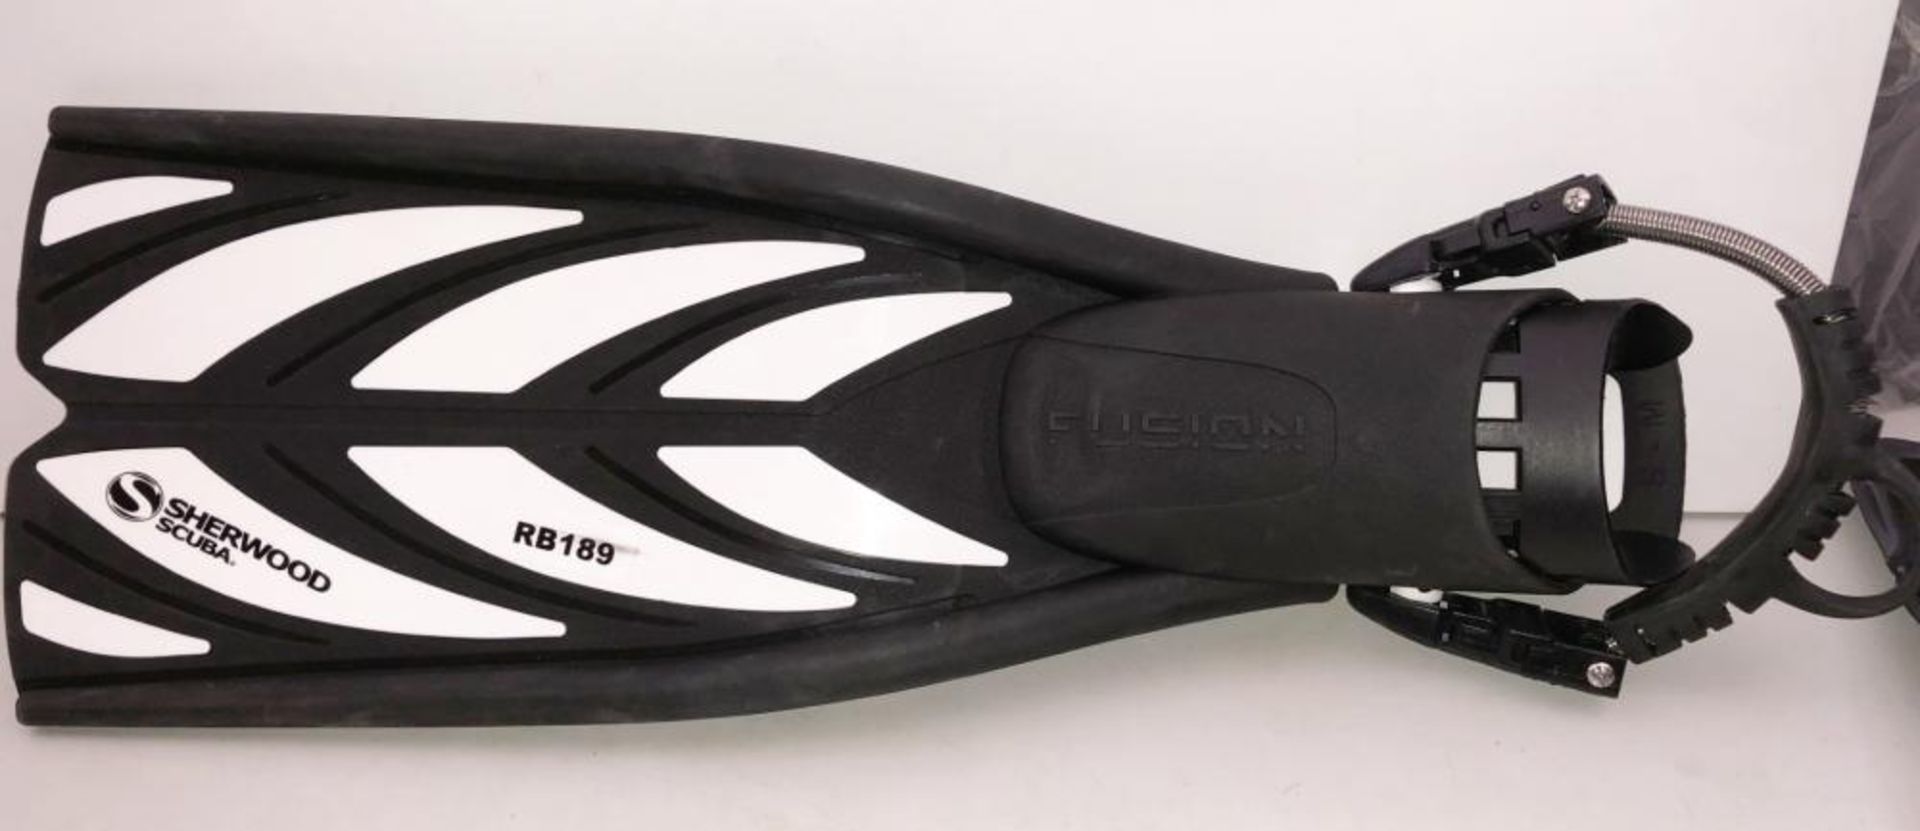 A Pair Of New Sherwood Scuba Fusion Diving Fins - Ref: RB189, RB190 - CL349 - Altrincham WA14 - Image 6 of 8